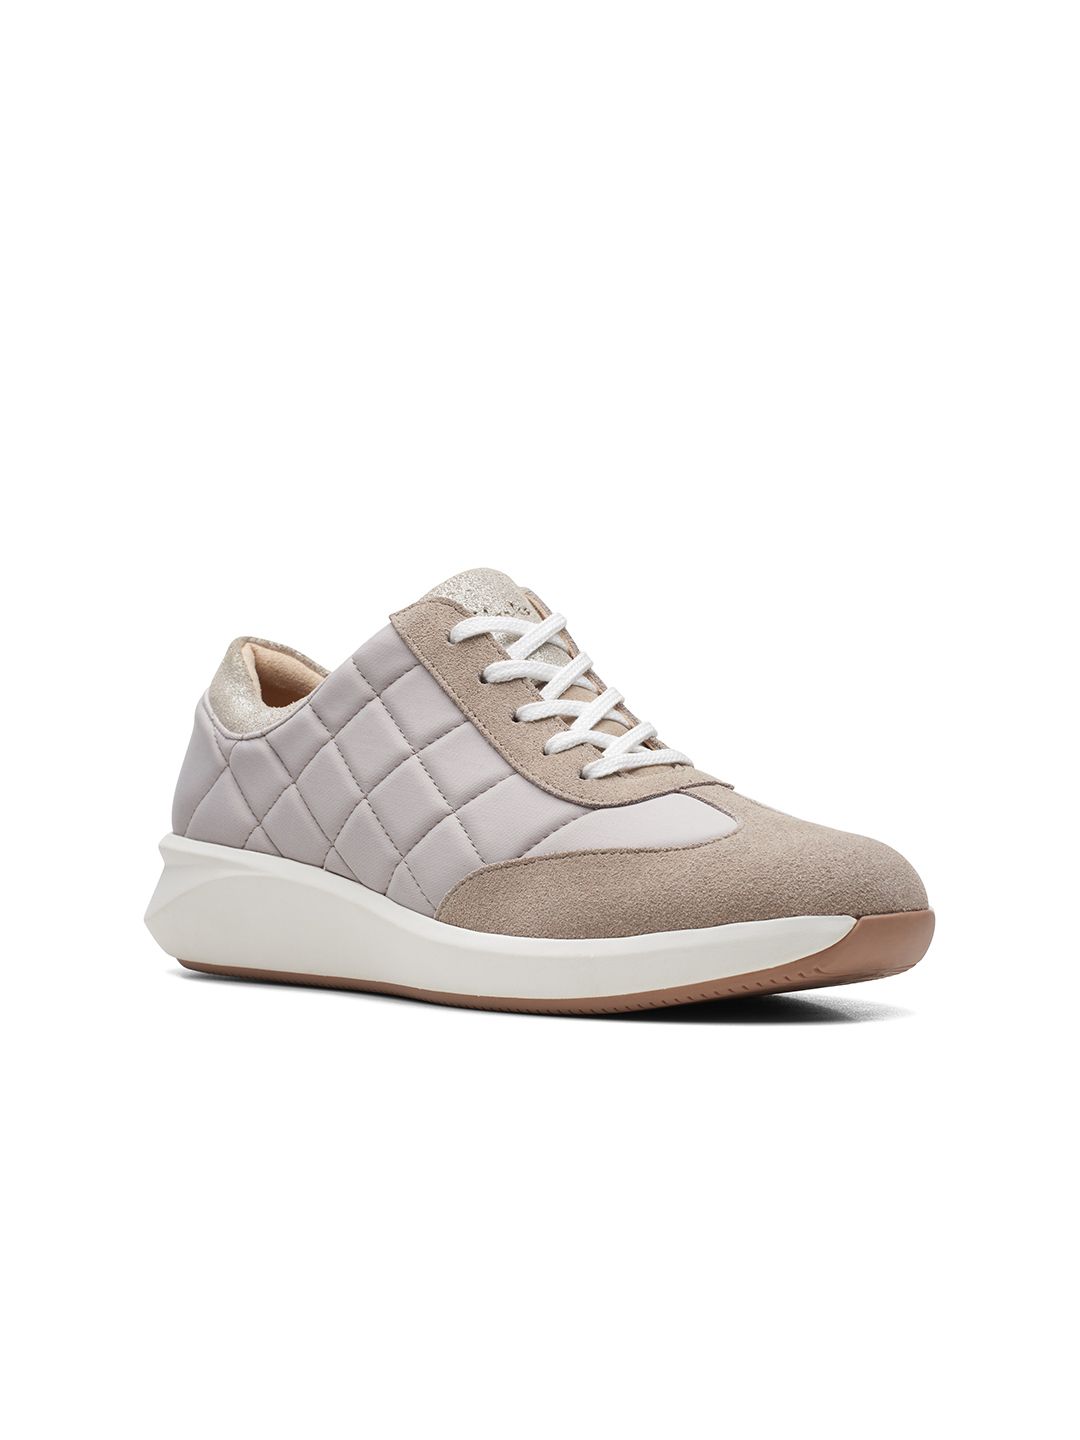 Clarks Women Brown Woven Design Leather Sneakers Price in India